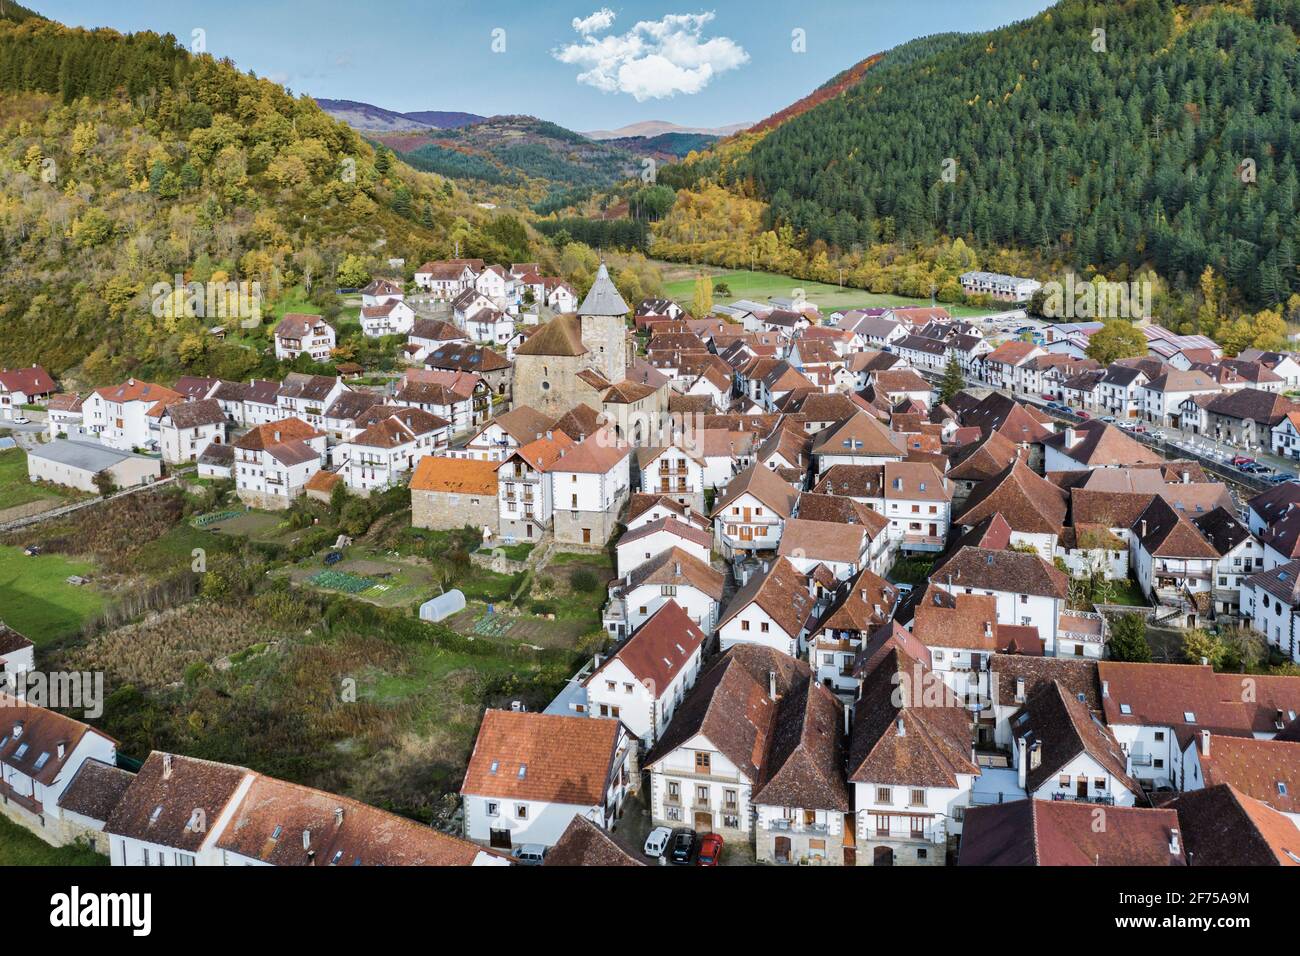 Aerial view of a village in a mountainous area. Stock Photo